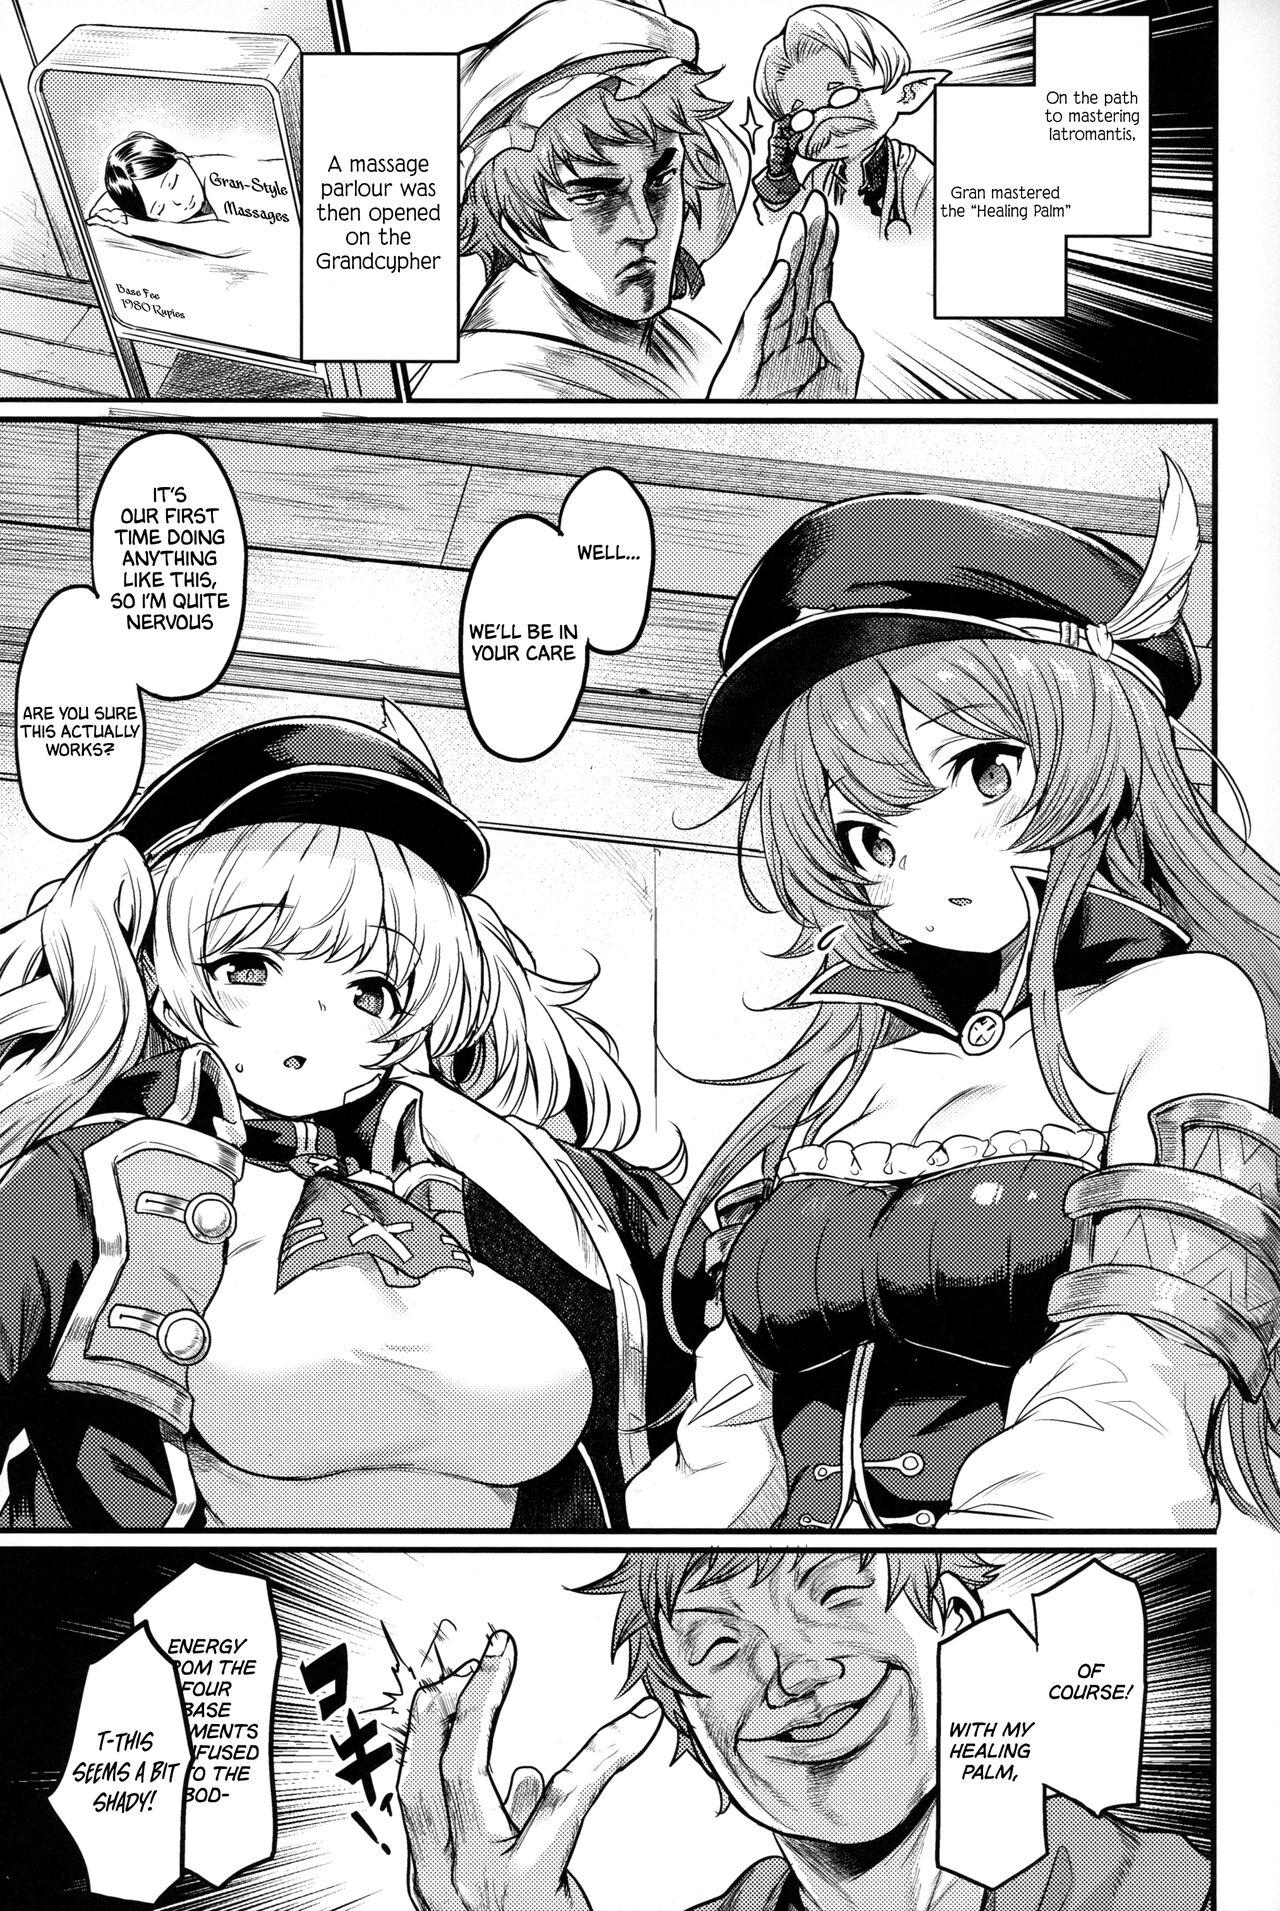 Pussy To Mouth Chitsujo Hustle! - Granblue fantasy Amatures Gone Wild - Page 2